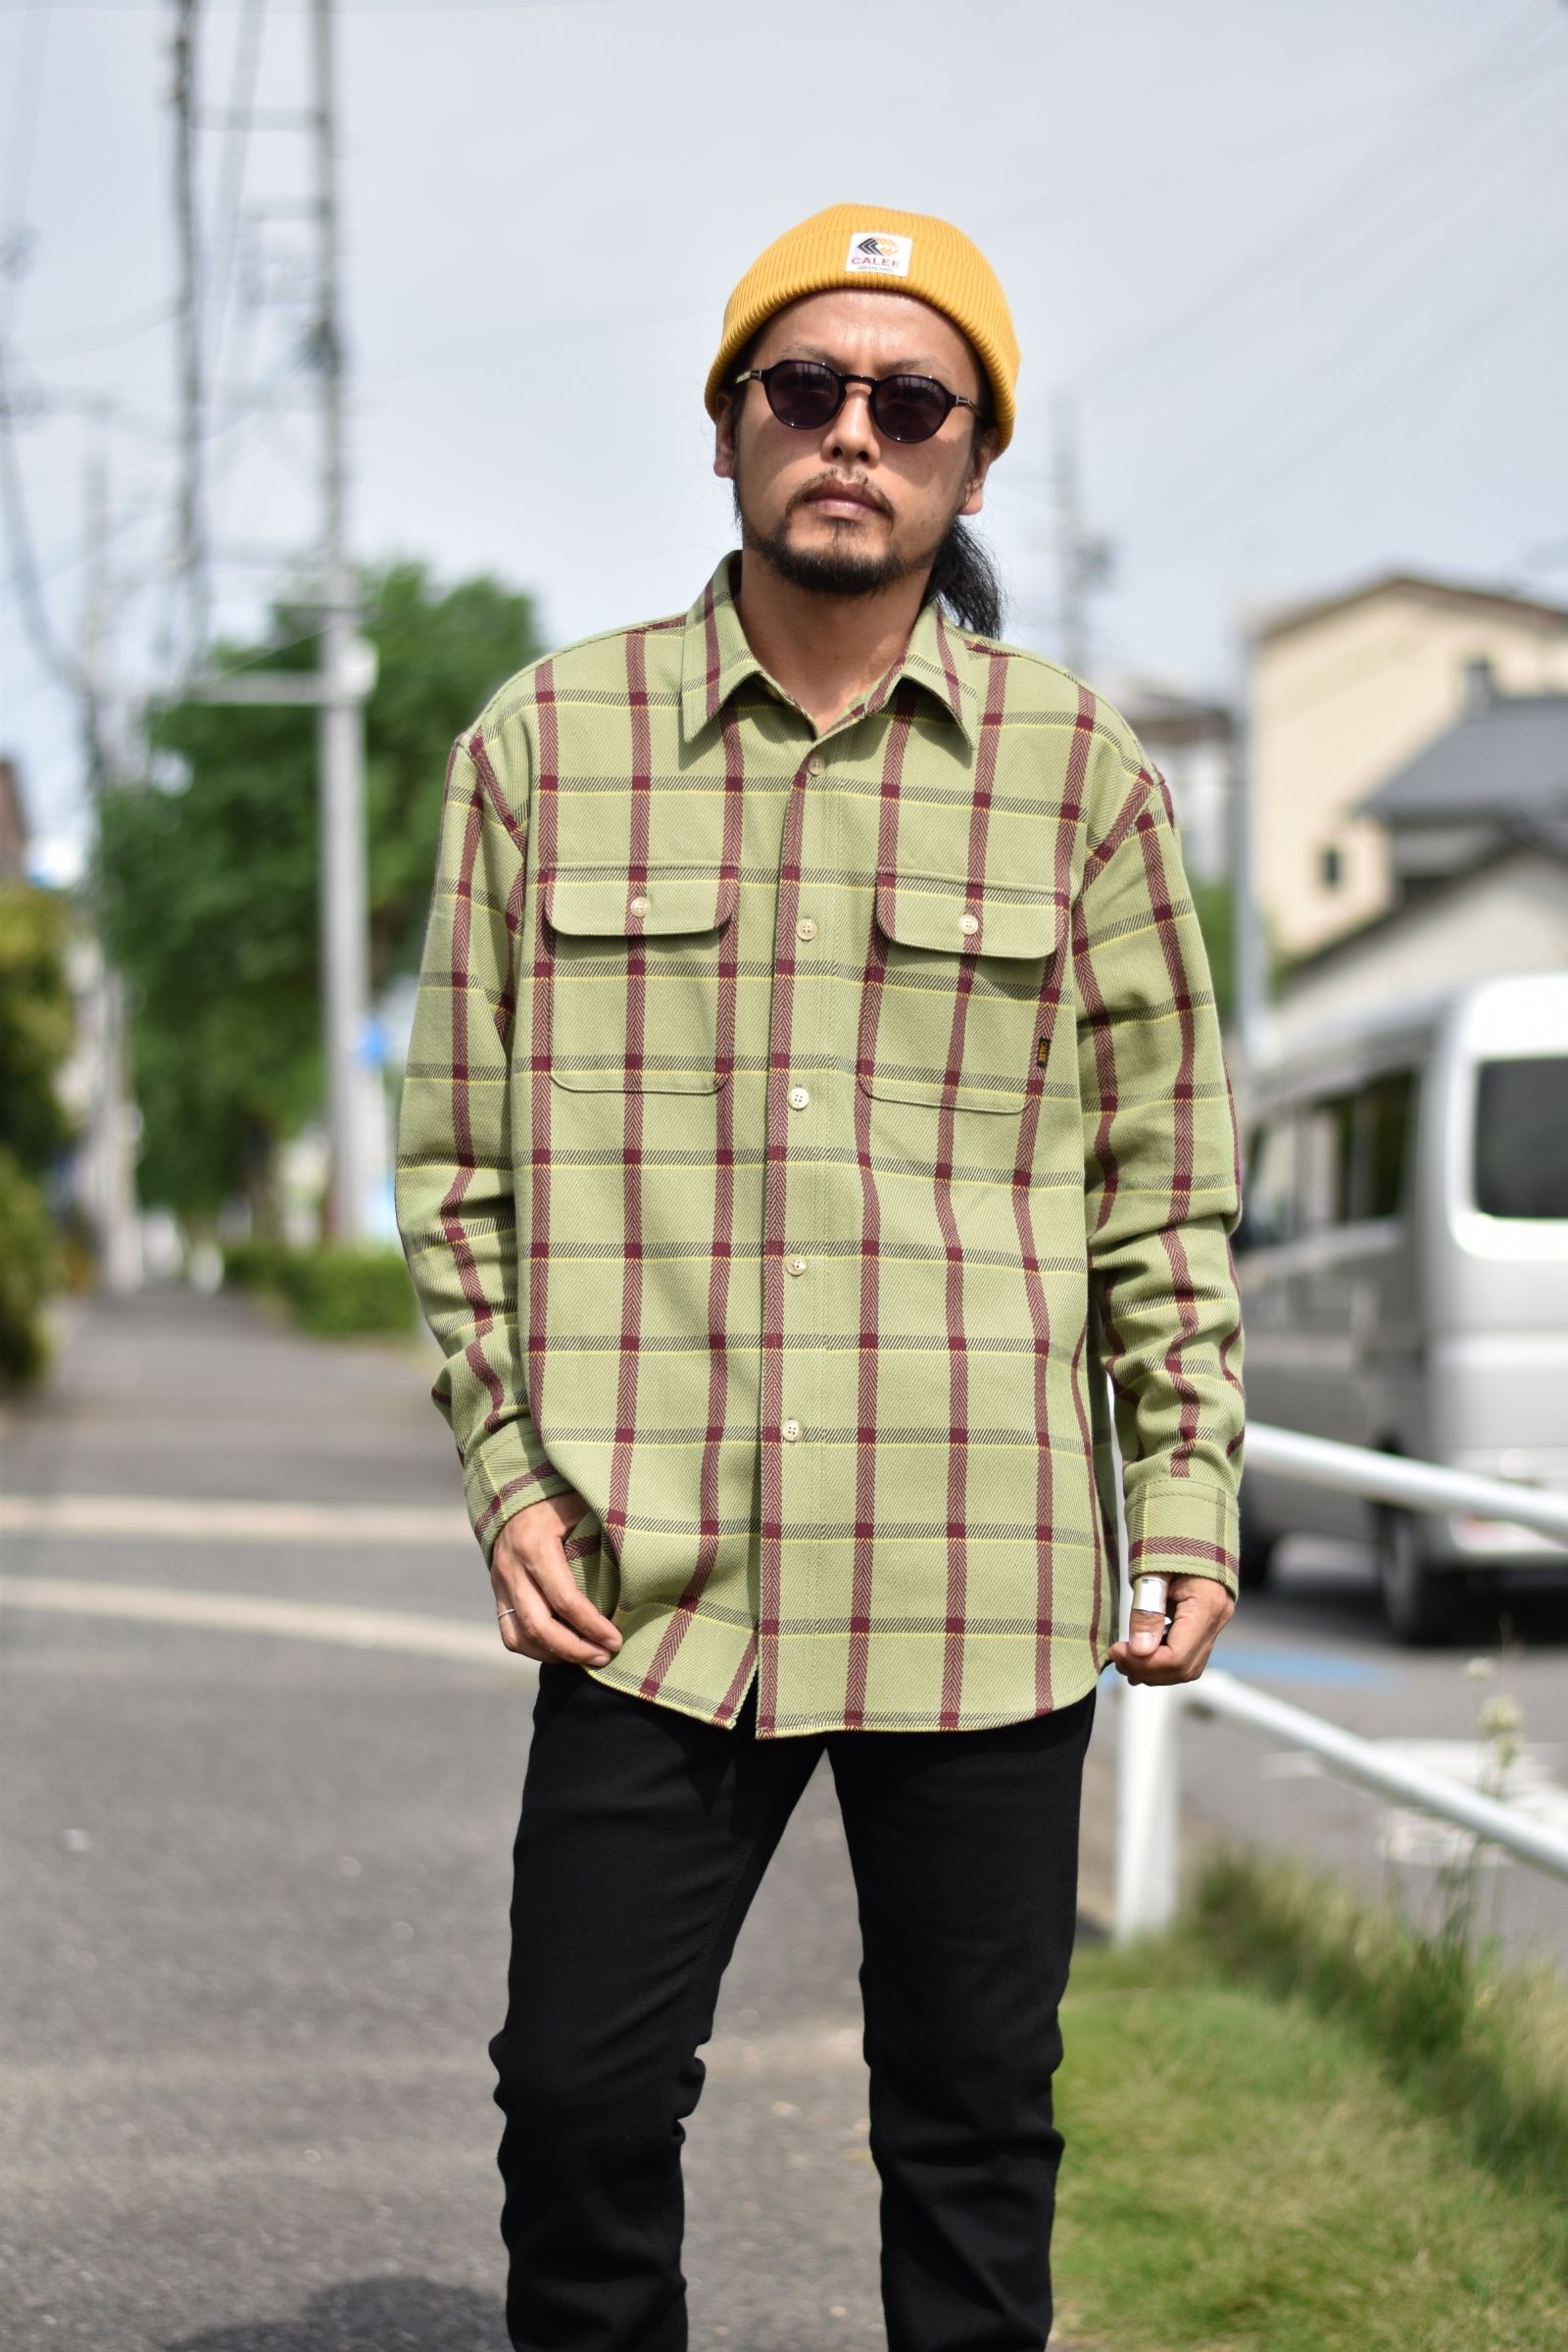 CALEE / 6/6 Twill L/S check shirt